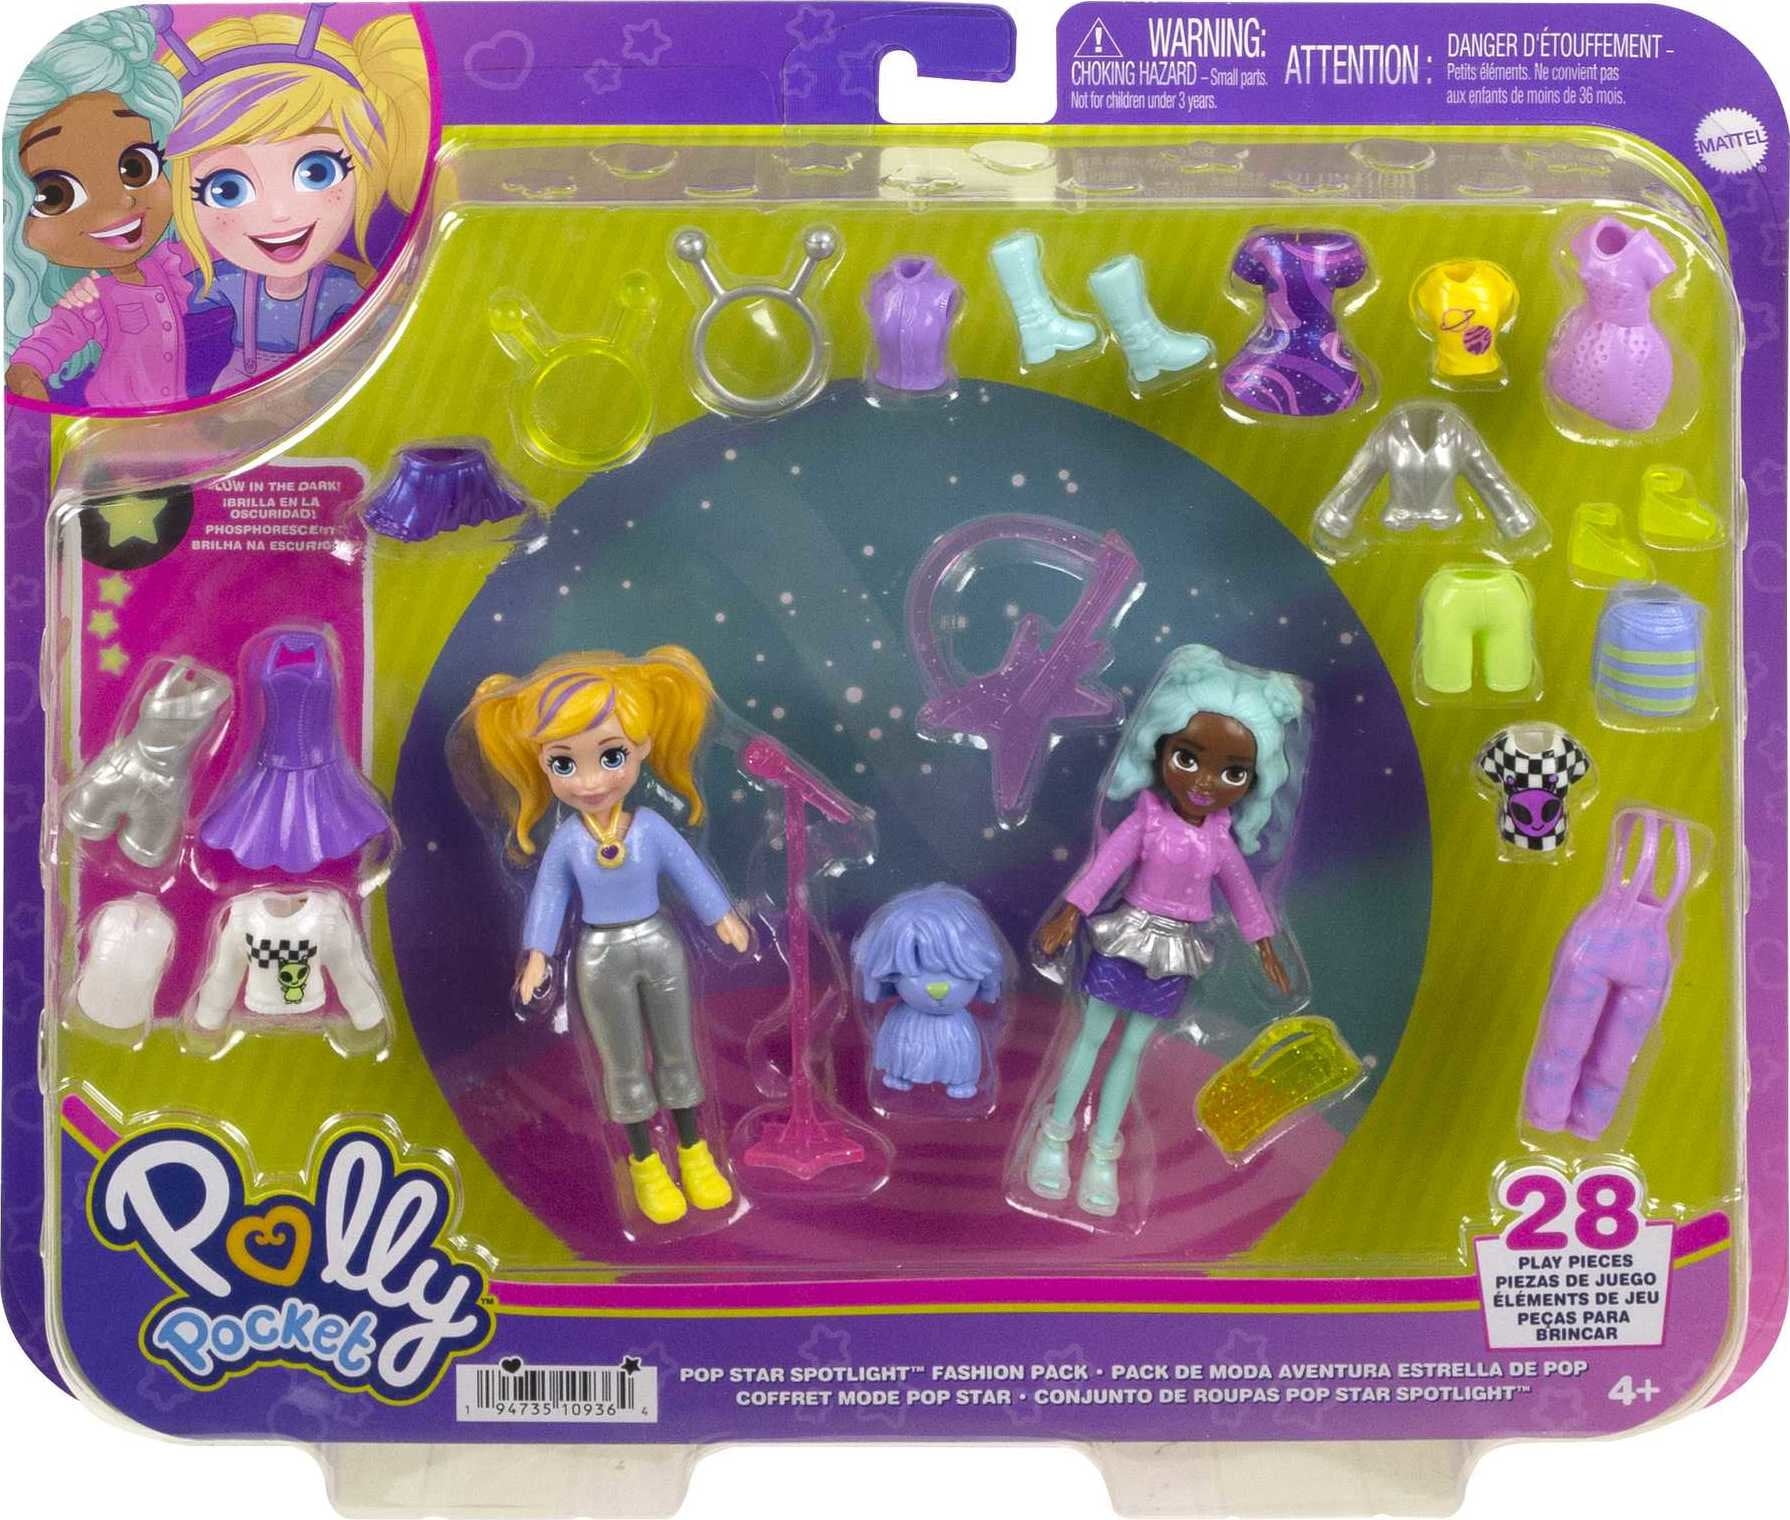 Friends' Drops New Polly Pocket Set, More Show-Inspired Merch for